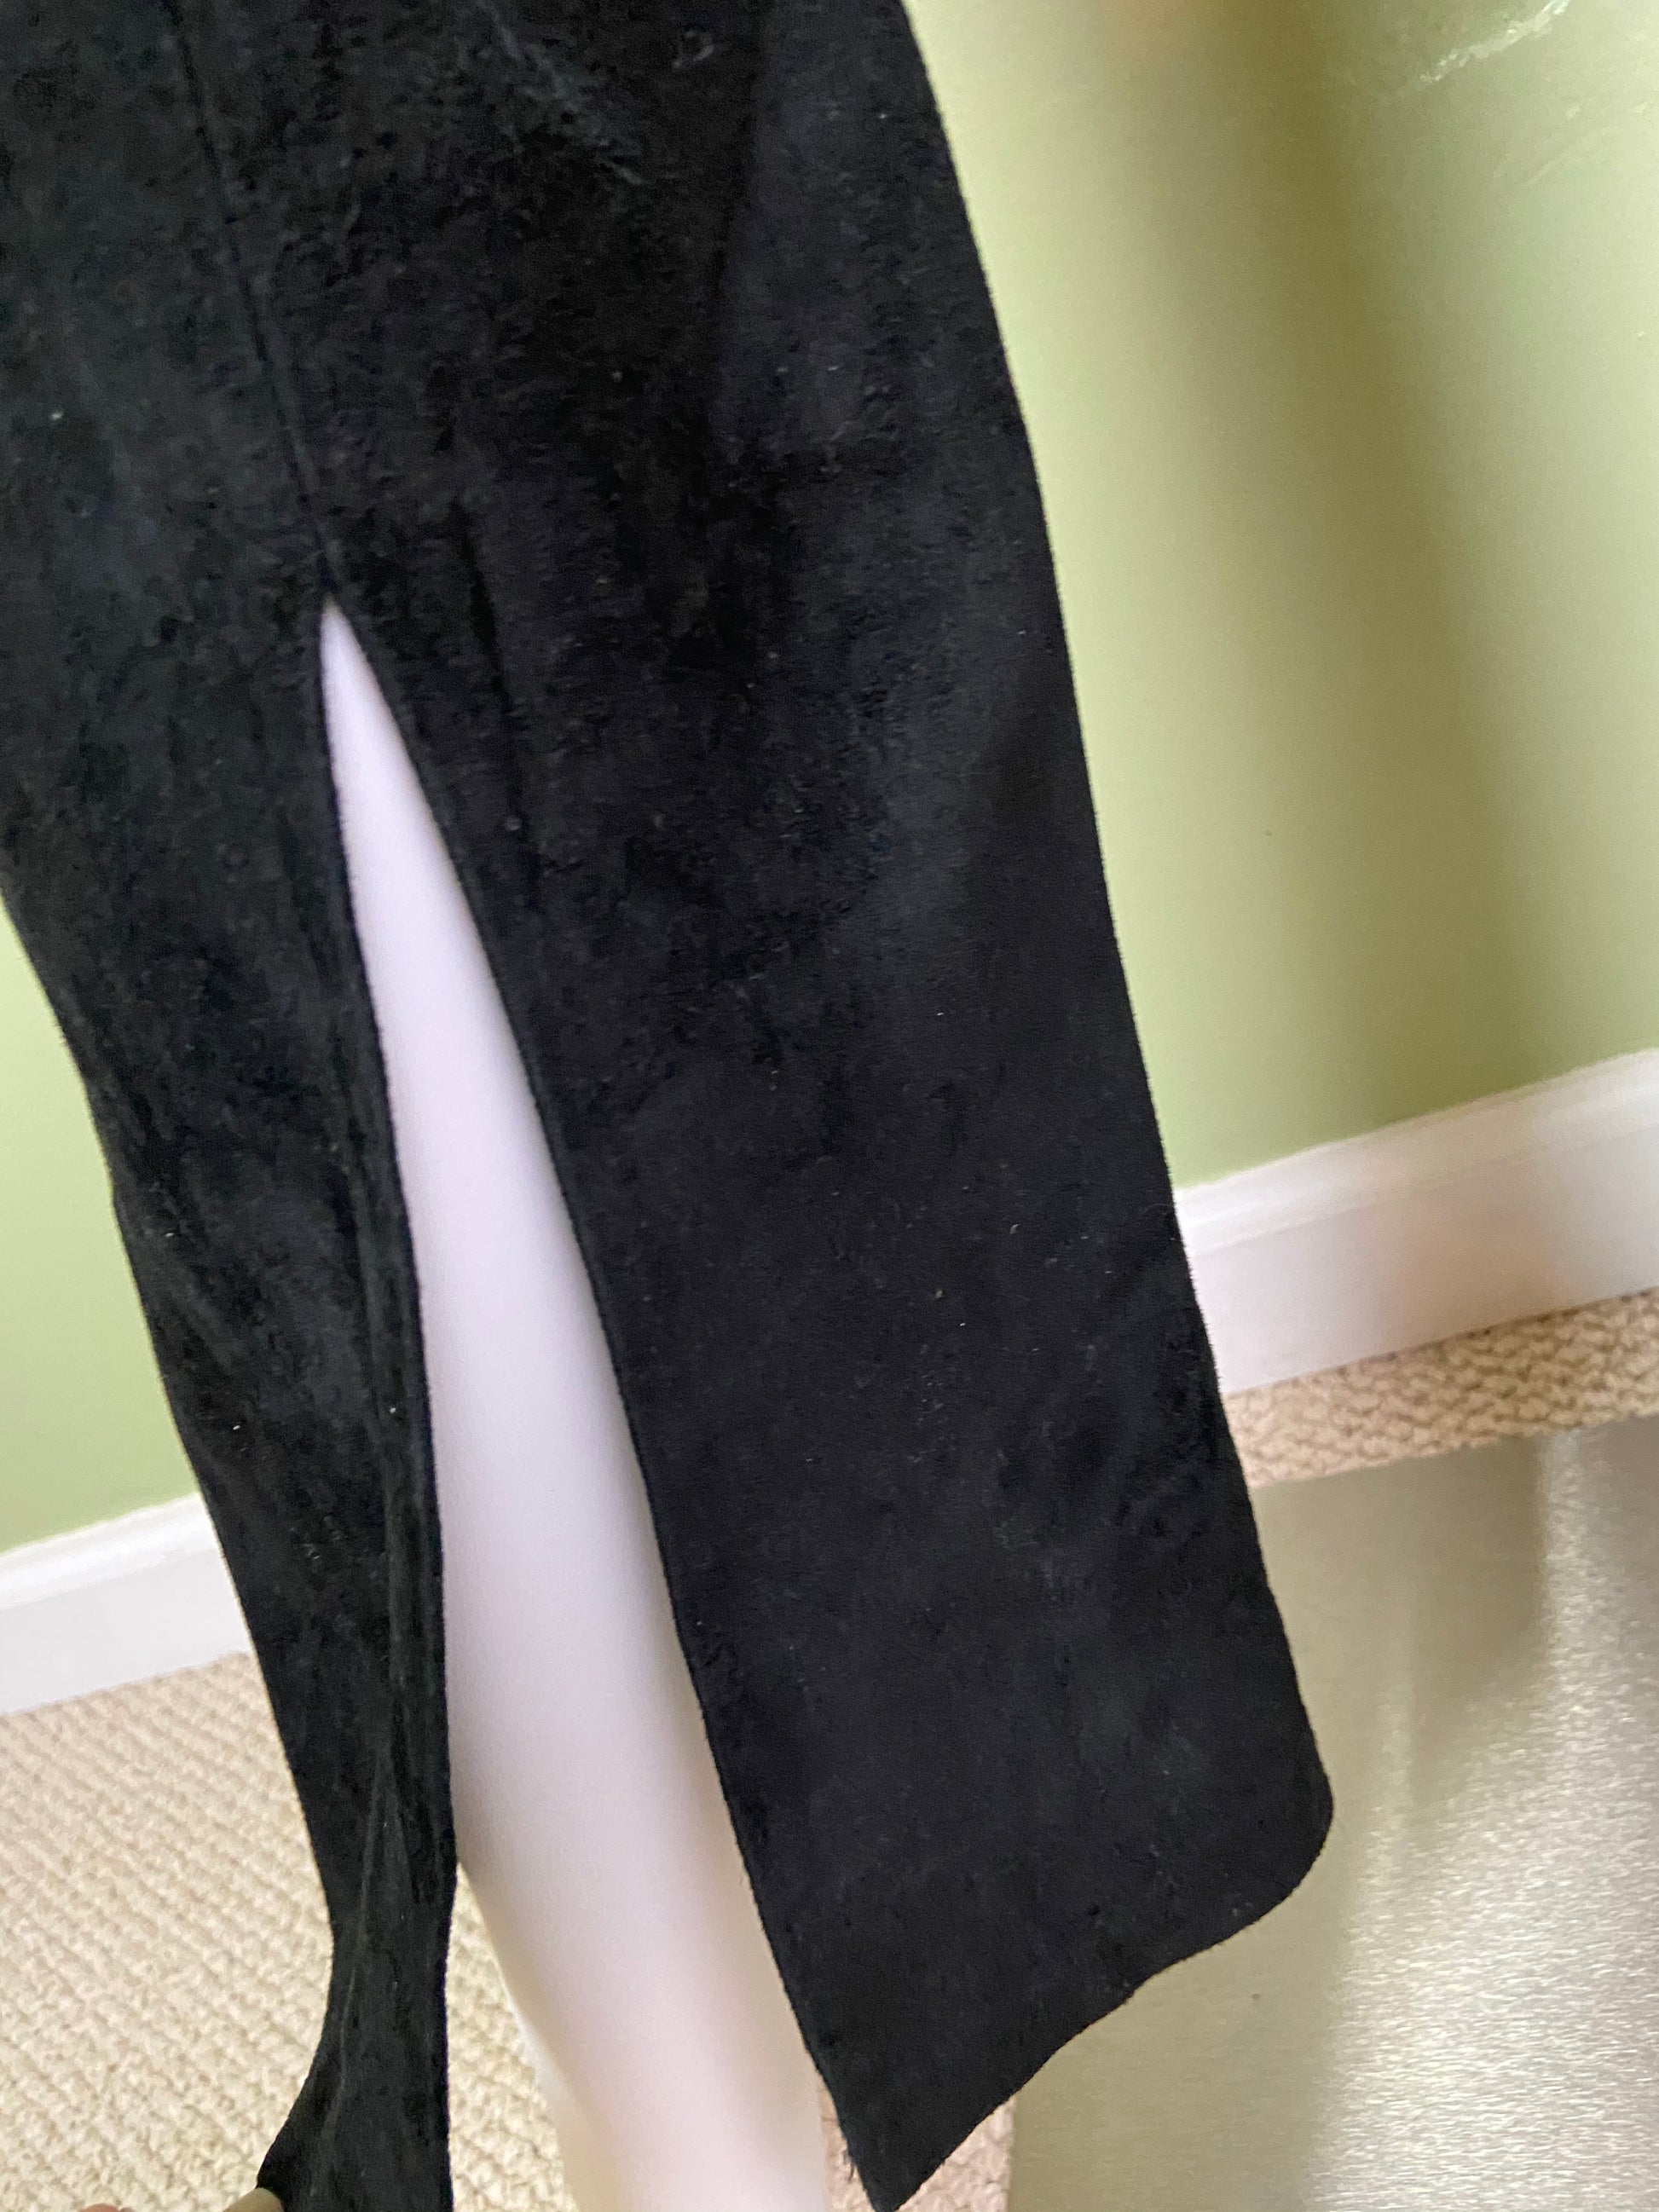 Black Suede Leather Festival Boot Cut Pants Abby Essie